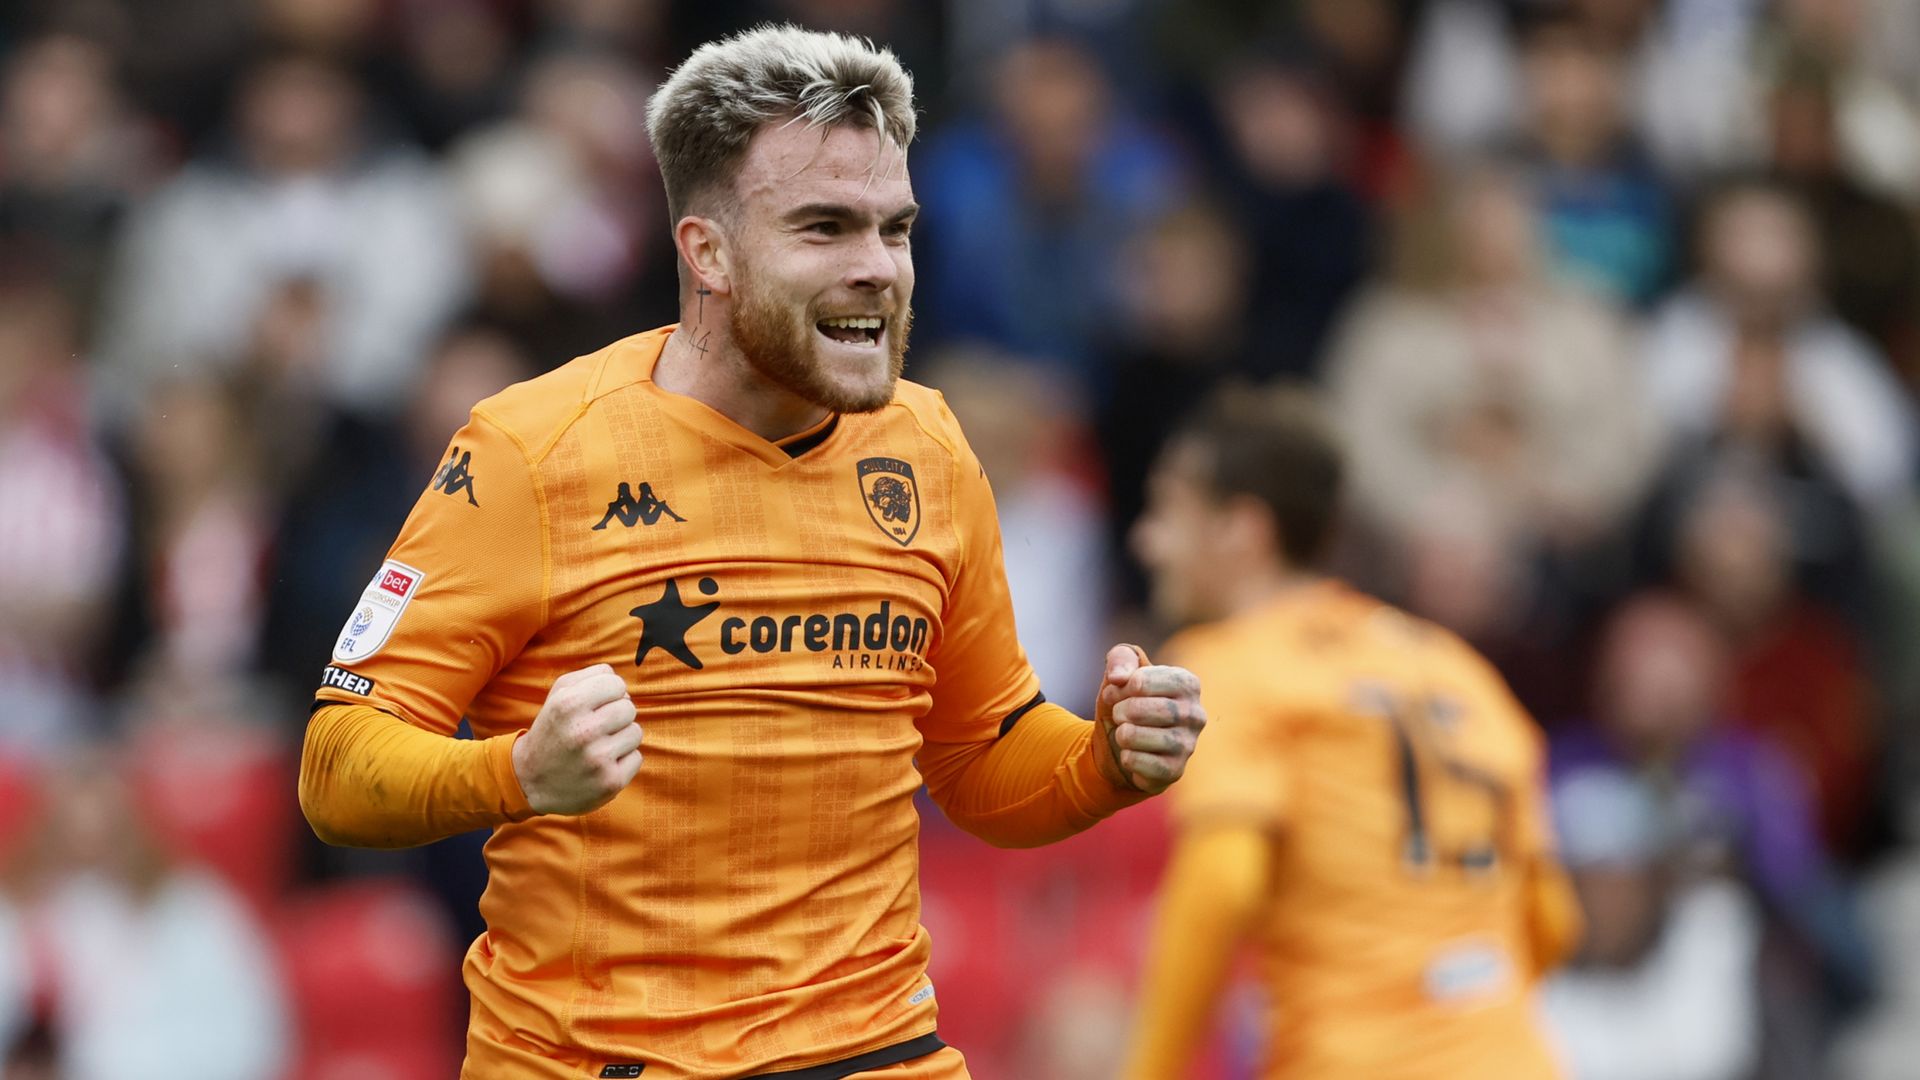 Hull ease past Stoke to climb into Championship play-off spots